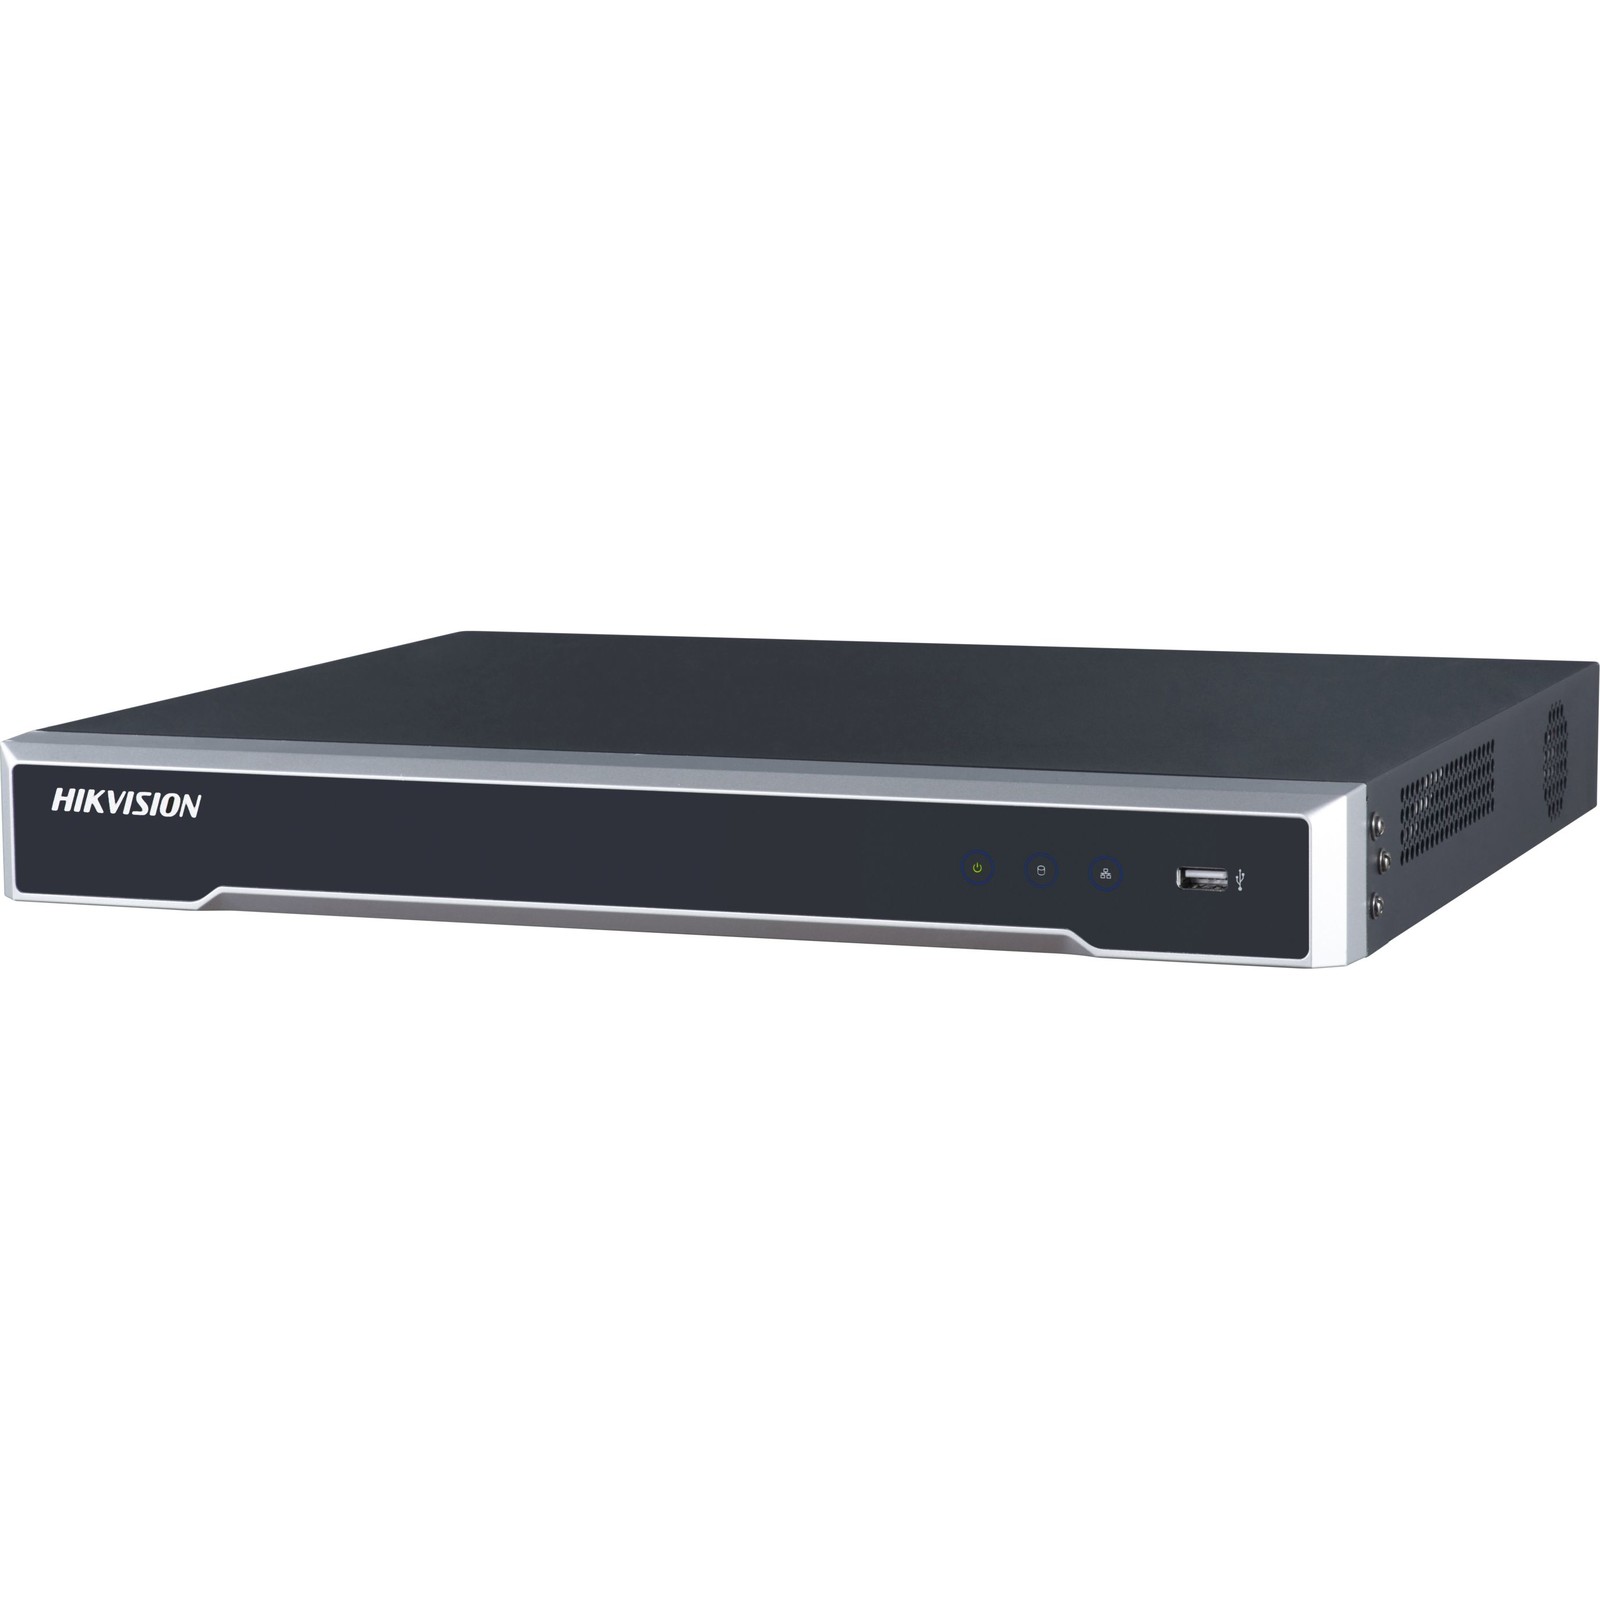 You Recently Viewed Hikvision DS-7608NI-K2/8P 8-channel 4K NVR Image